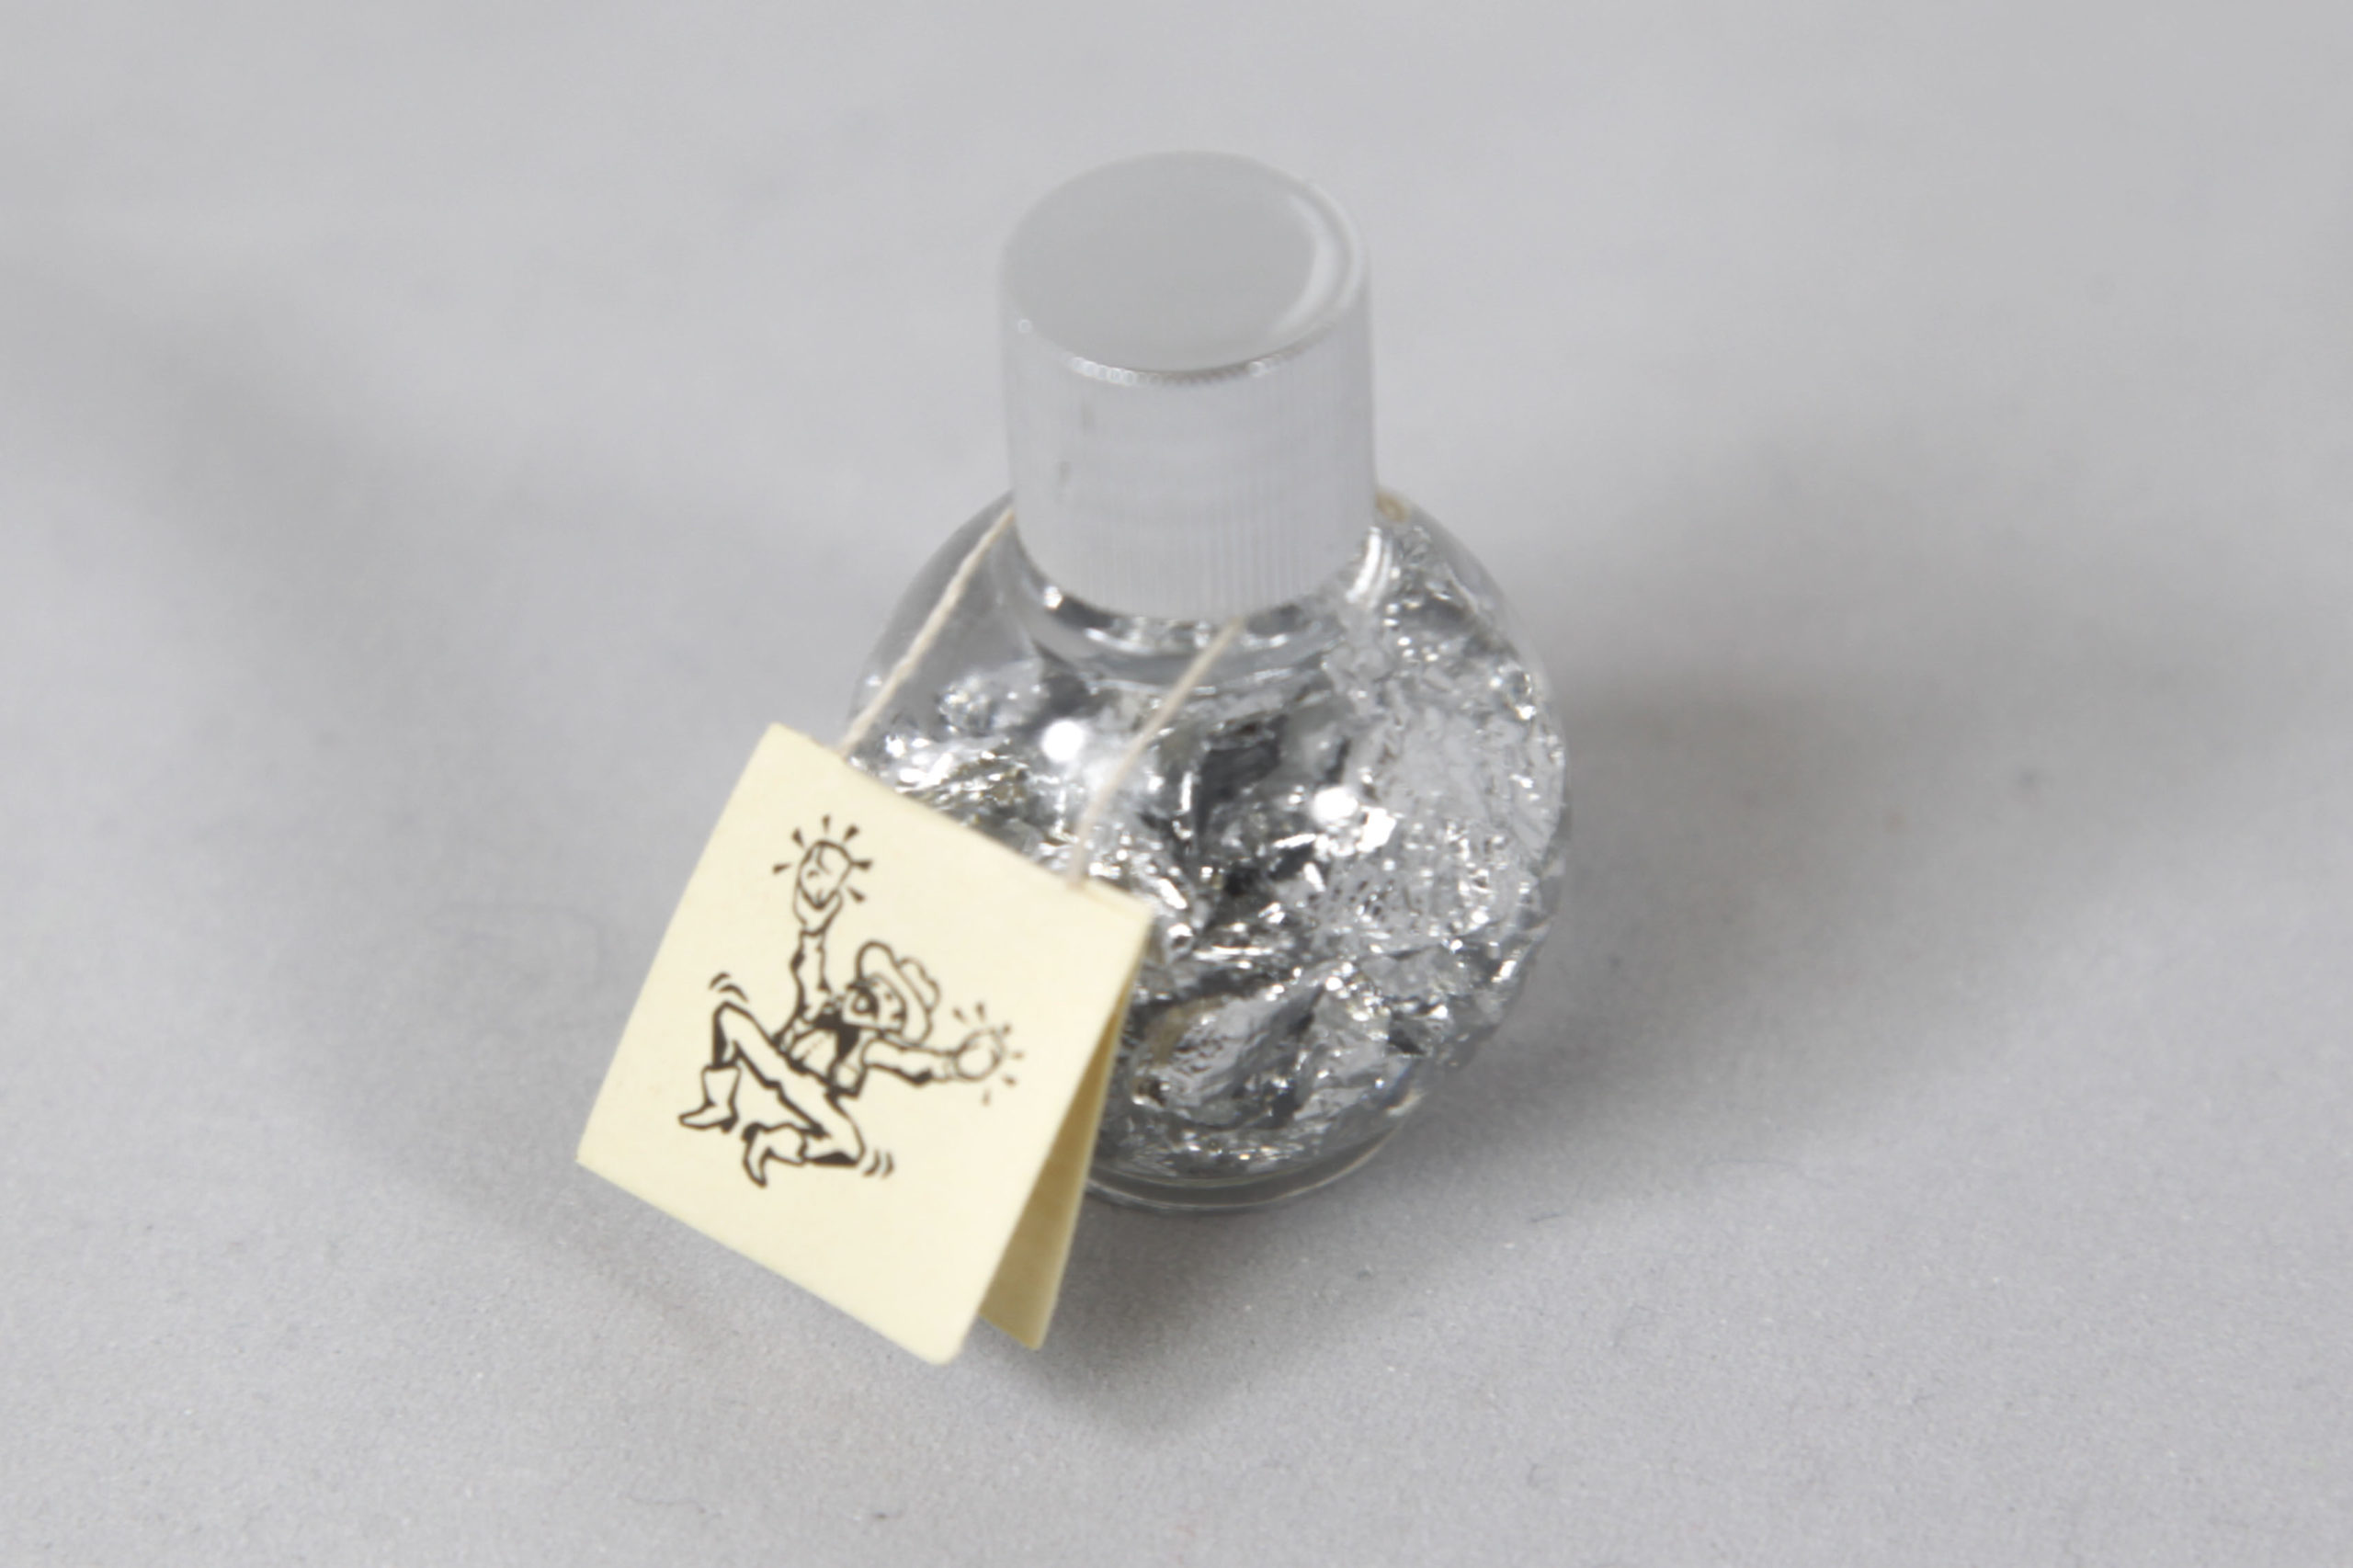 Real Silver Flake in glass bottle